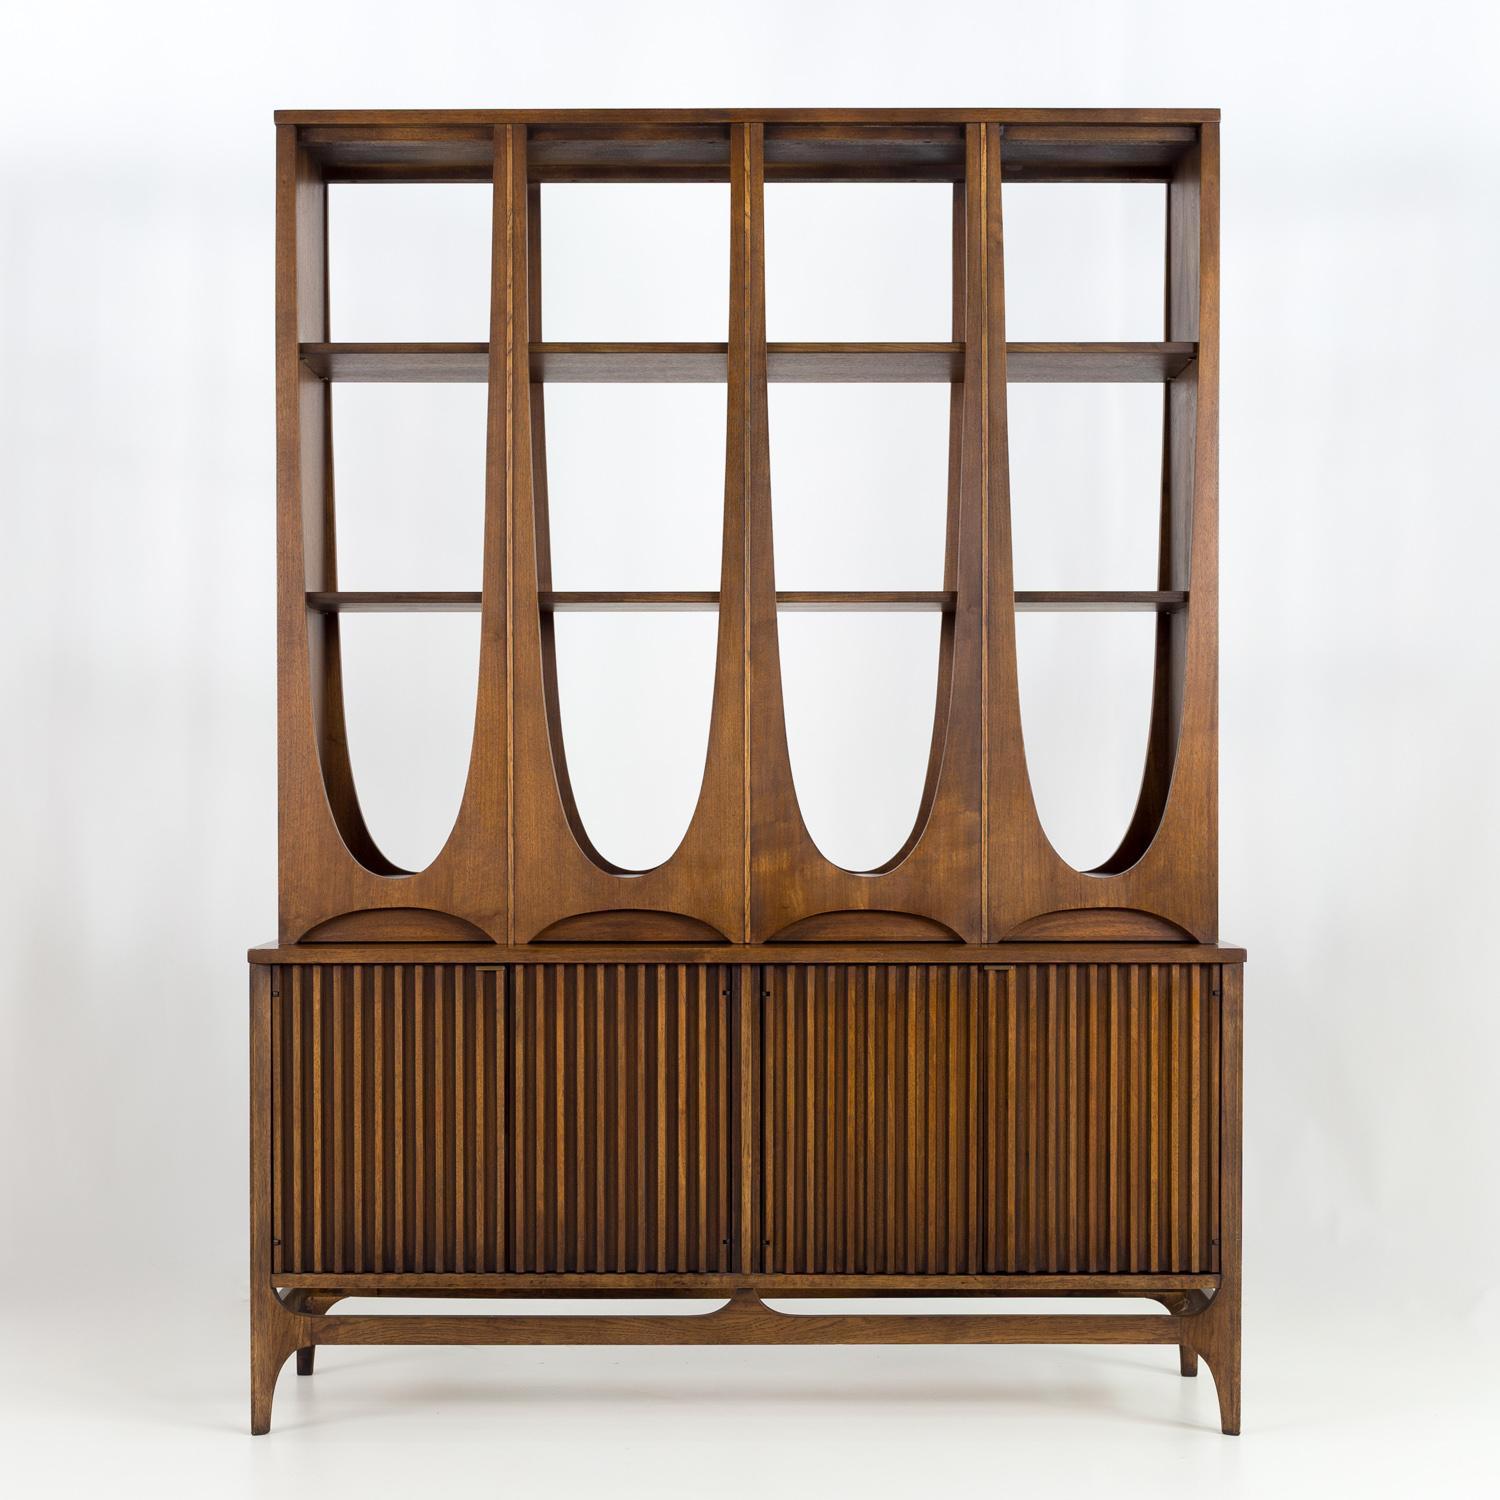 Broyhill Brasilia Mid Century room divider wall unit shelving

Base is 54 wide x 17 deep x 26.5 inches high and top is 52 wide x 13.5 deep x 46 inches high
Overall measurements are 54 wide x 17 deep x 72.5 inches high

All pieces of furniture can be